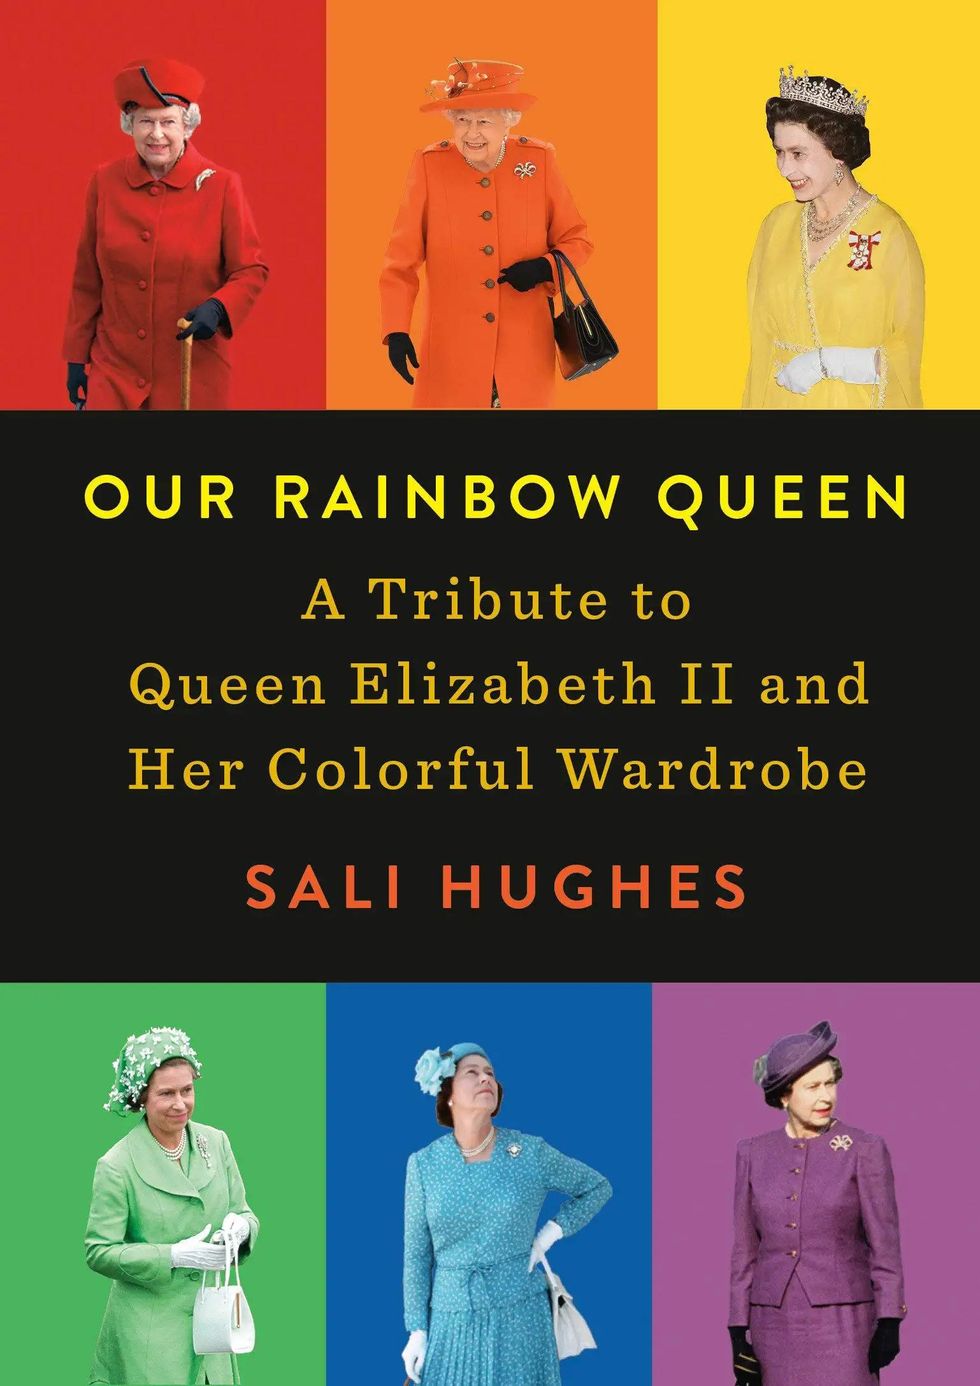 Our Rainbow Queen: A Tribute to Queen Elizabeth II and Her Colorful Wardrobe by Sali Hughes